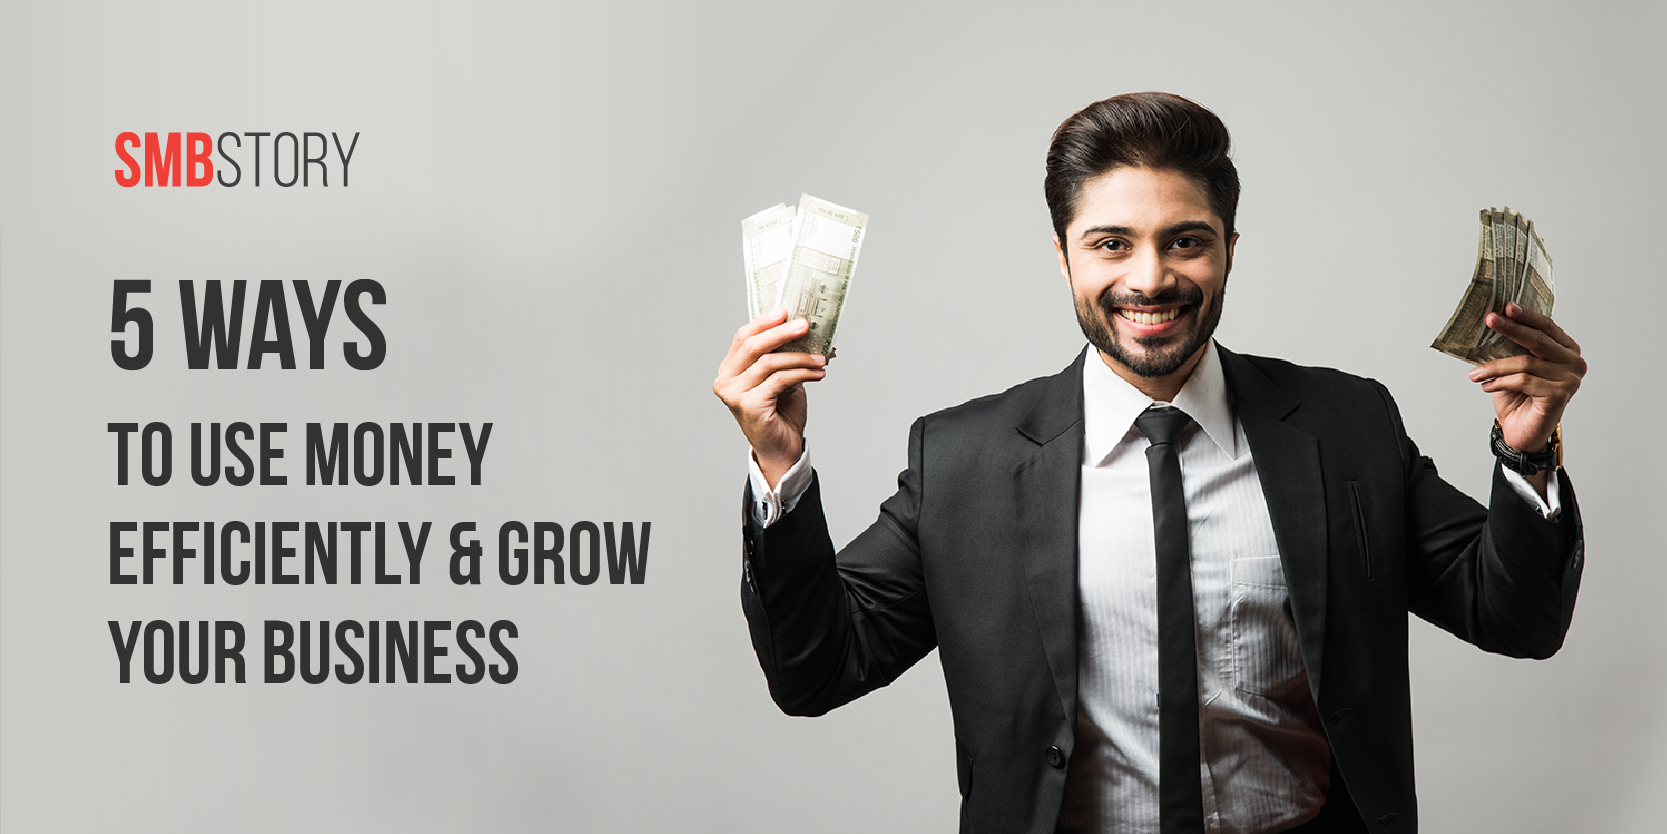 5 tips for small businesses, MSMEs to use money efficiently and grow faster